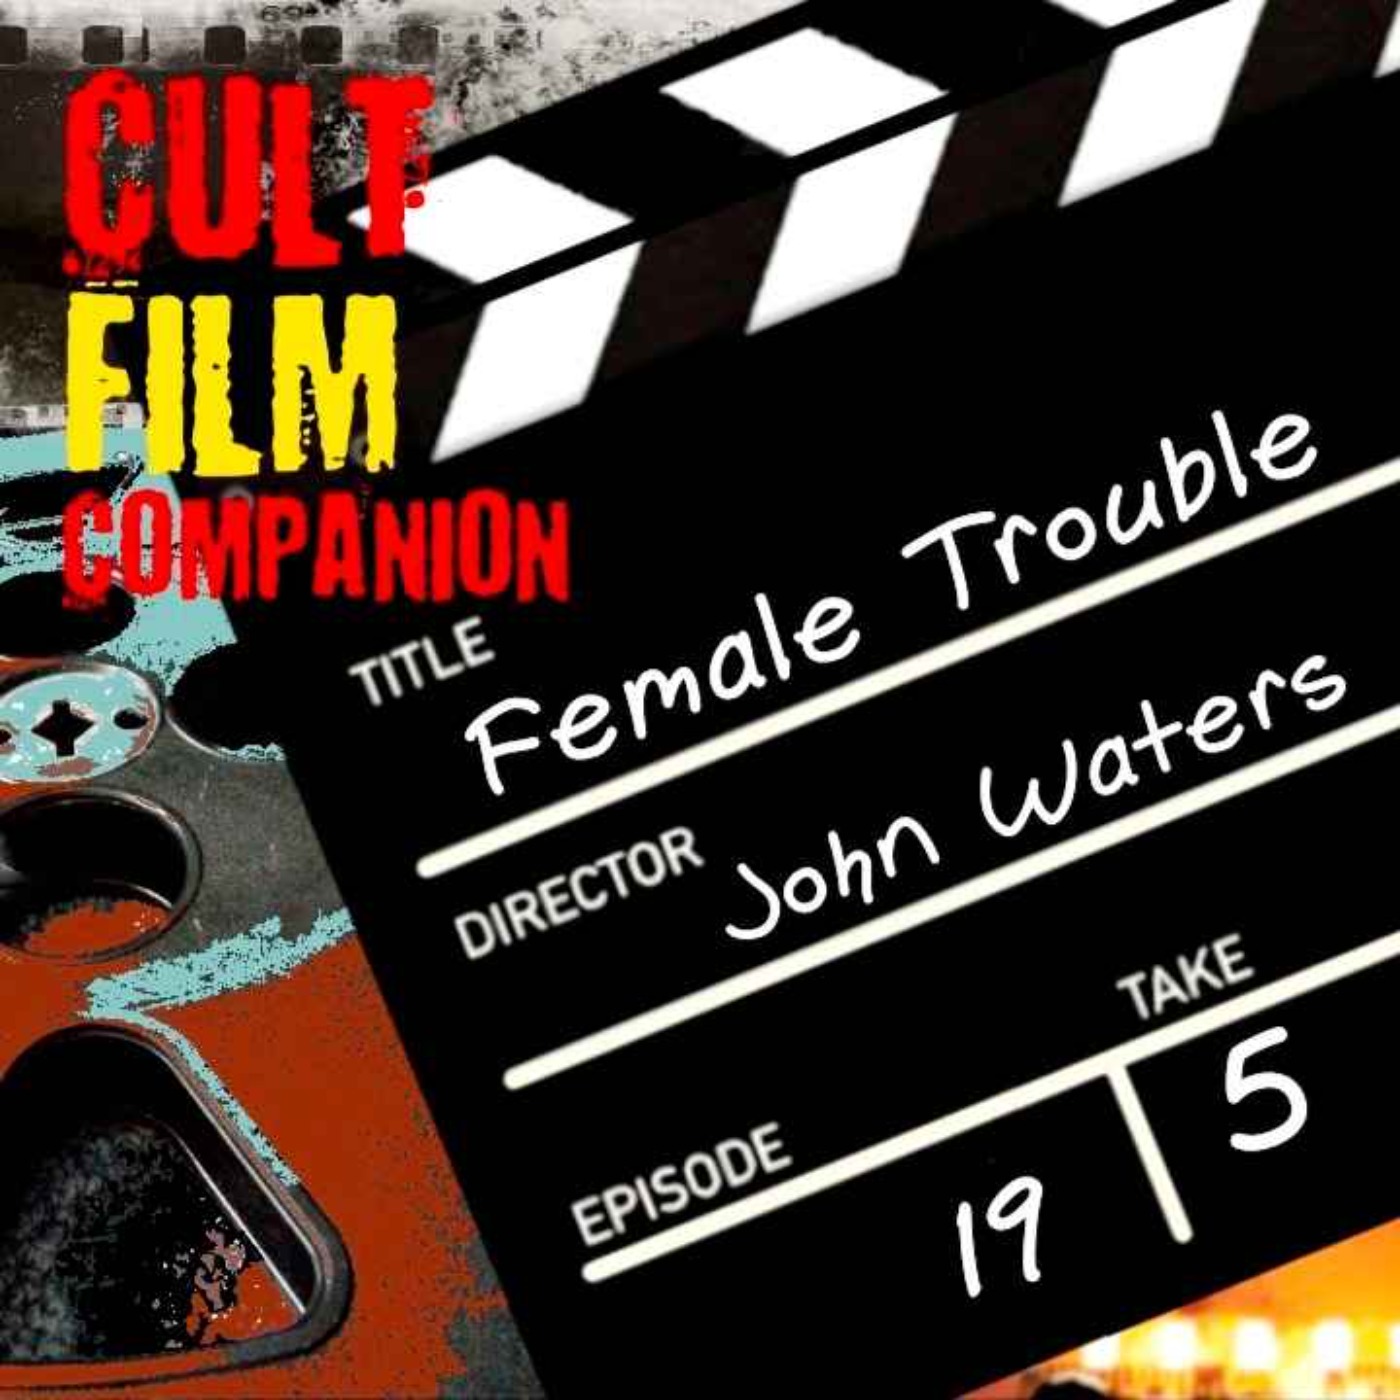 Ep. 19 Female Trouble directed by John Waters